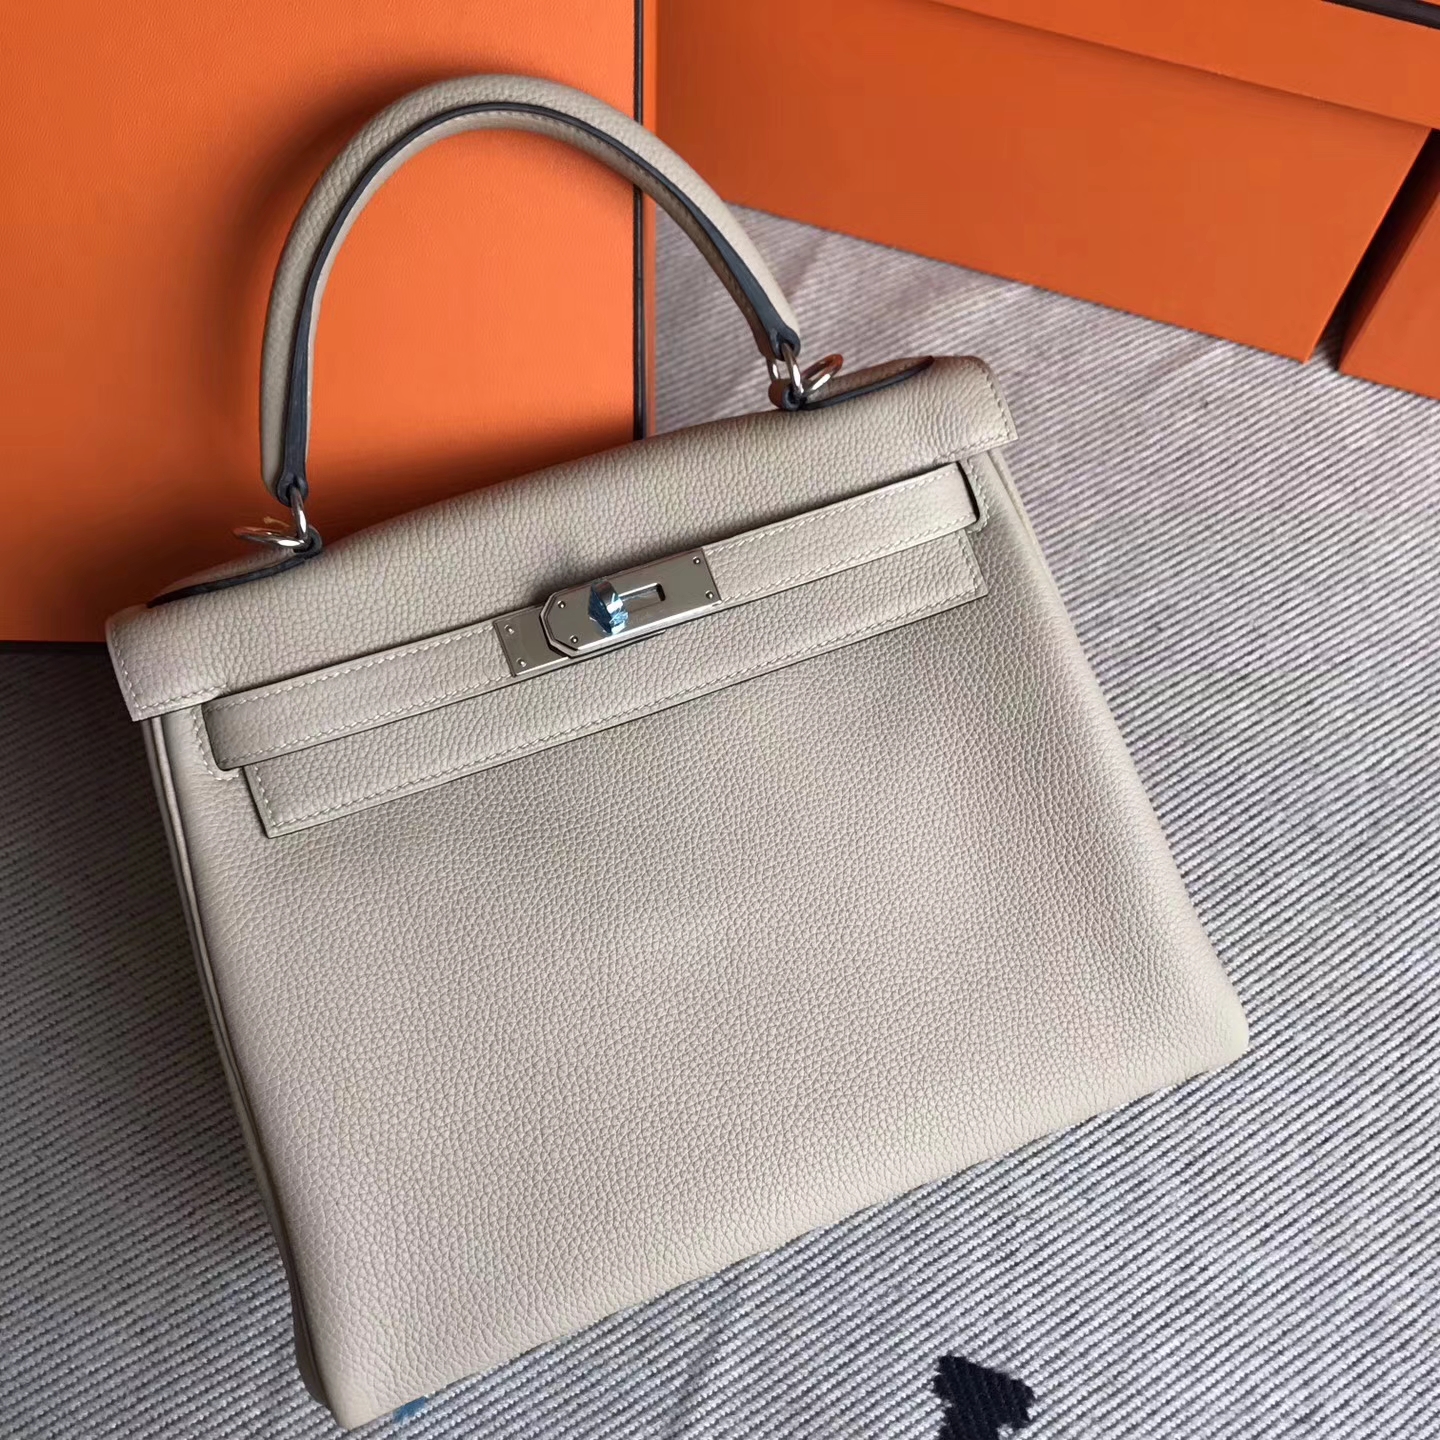 Wholesale Hermes Togo Leather Kelly Bag28cm in S2 Trench Grey Silver Hardware